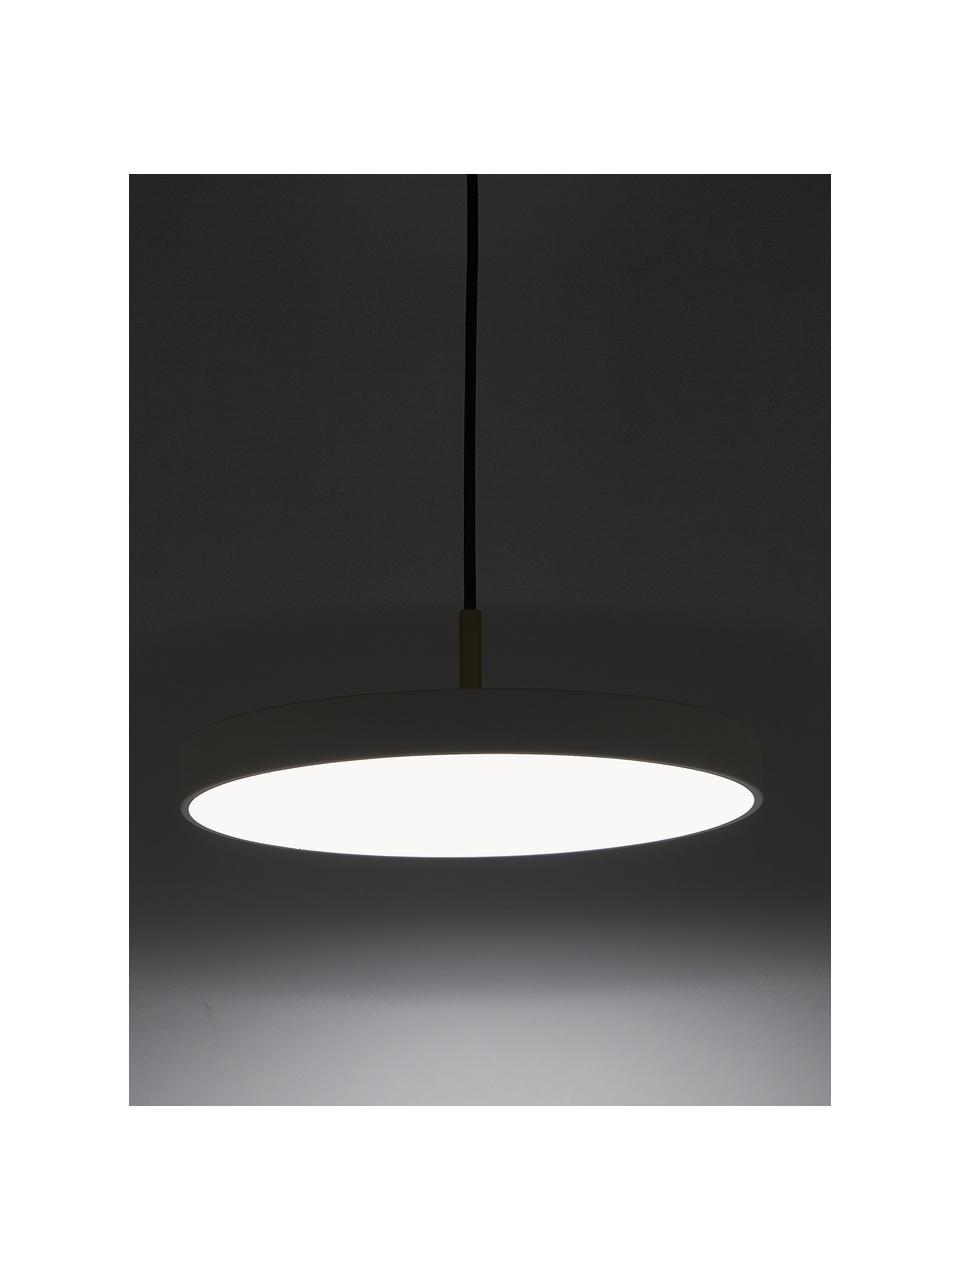 Dimmbare LED-Pendelleuchte Asteria, Cremeweiss, Ø 15 x H 6 cm